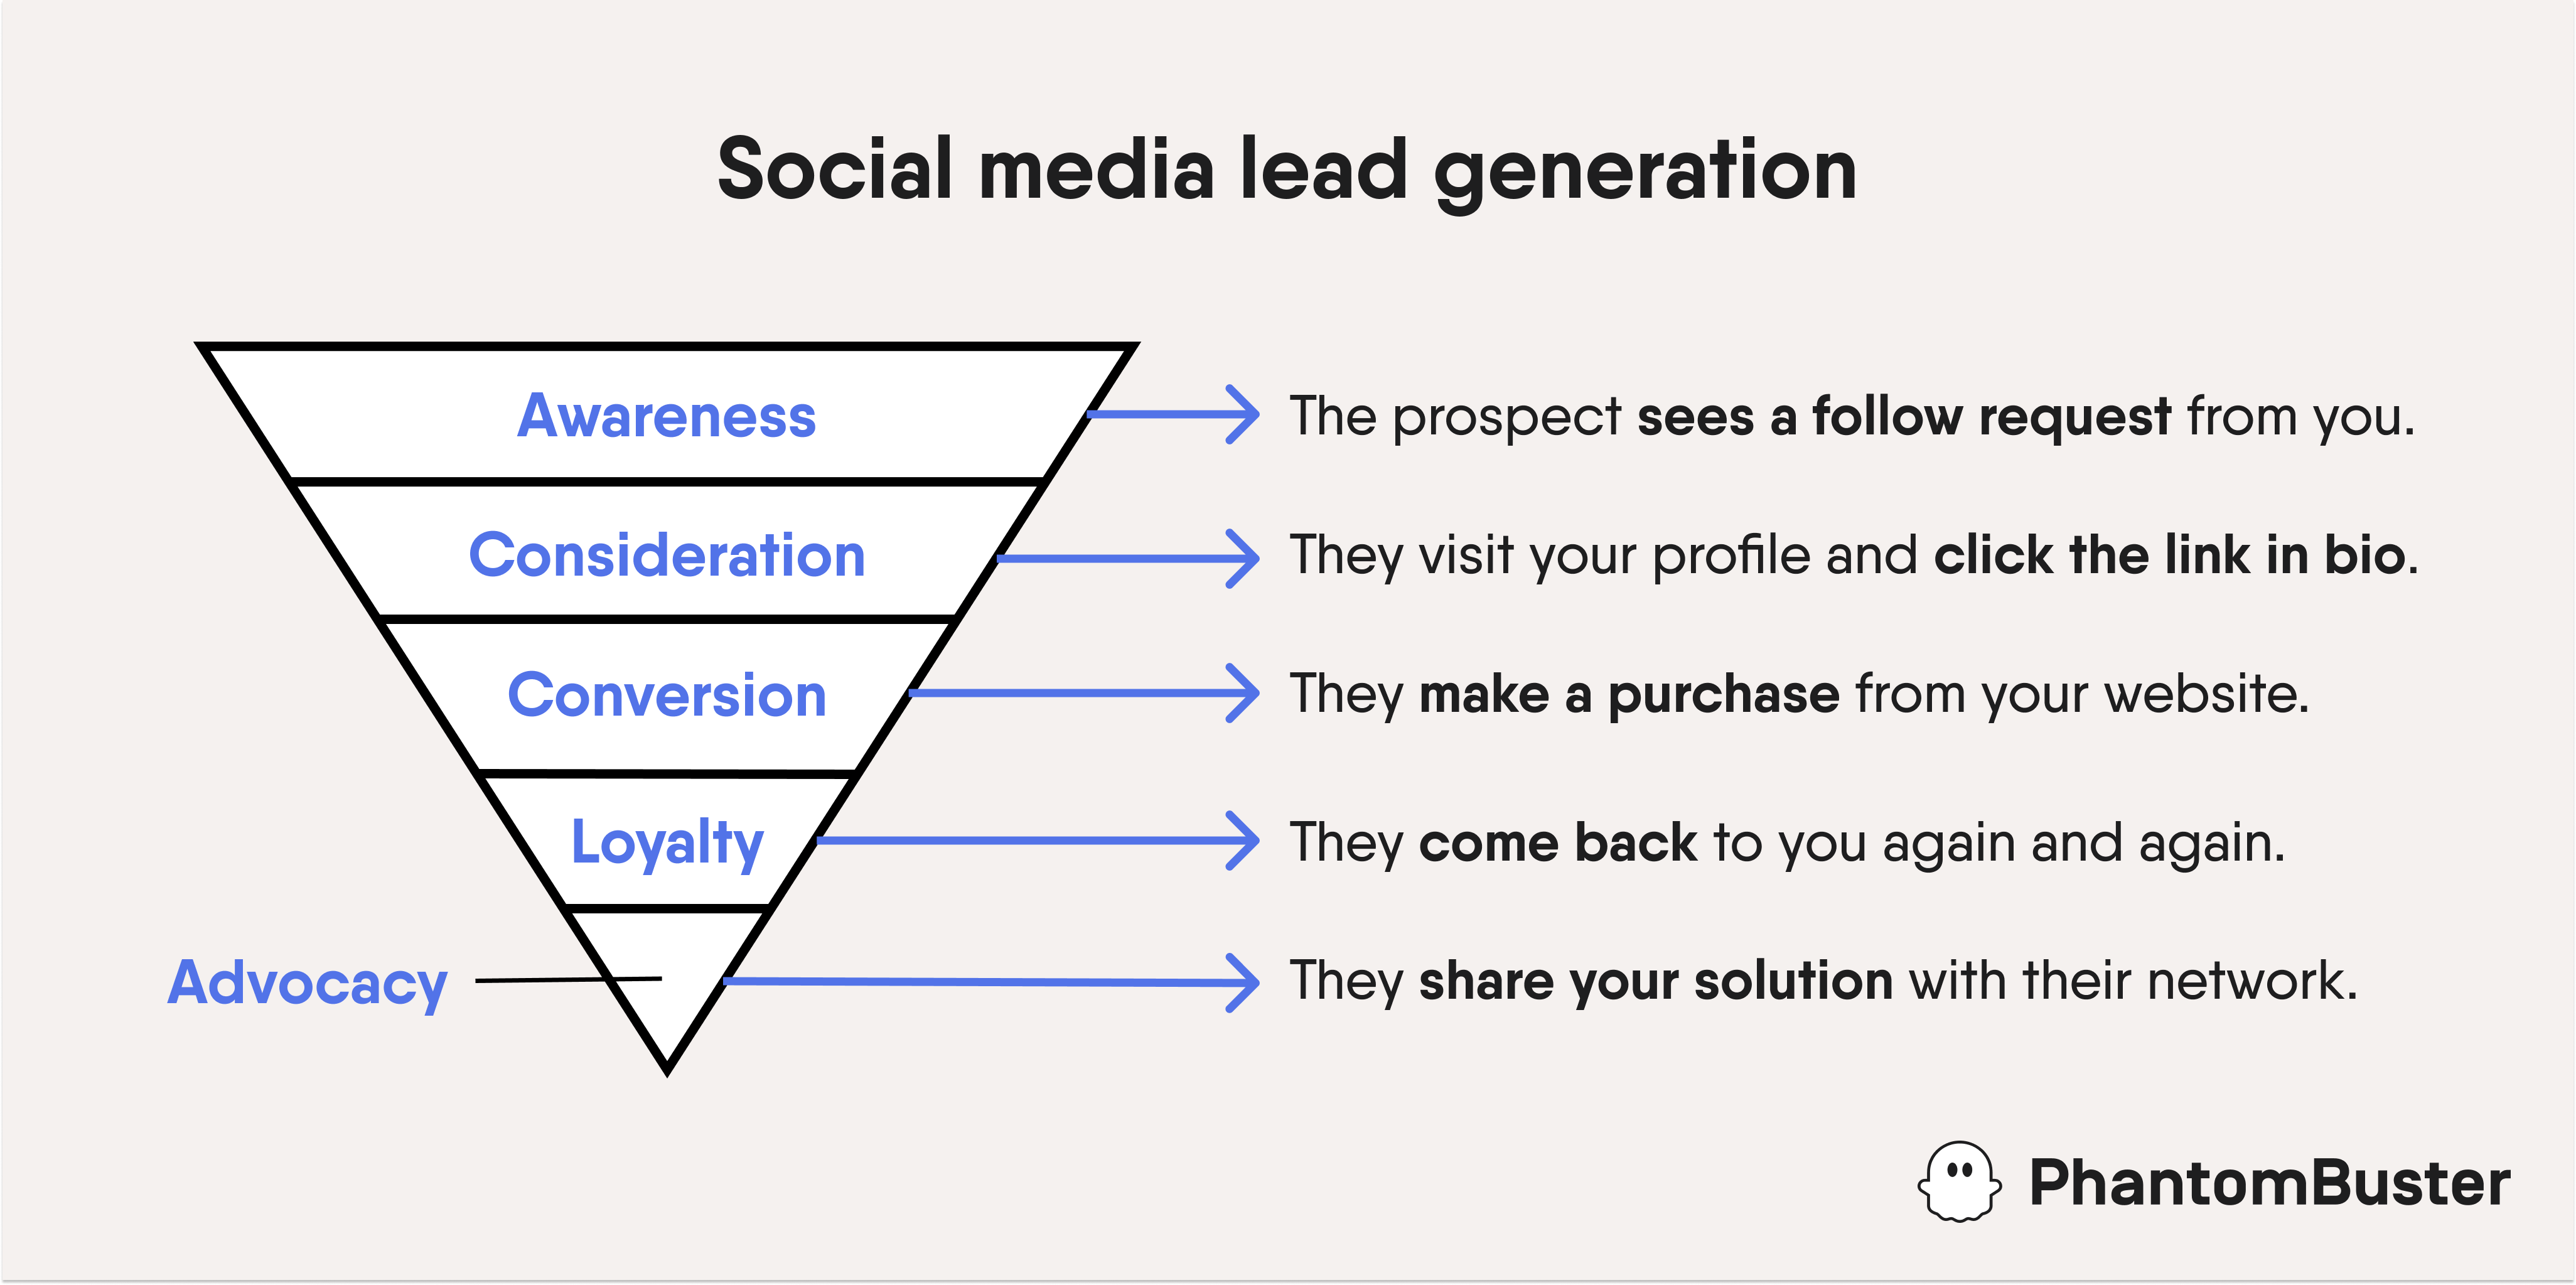 social media marketing role in lead generation research paper